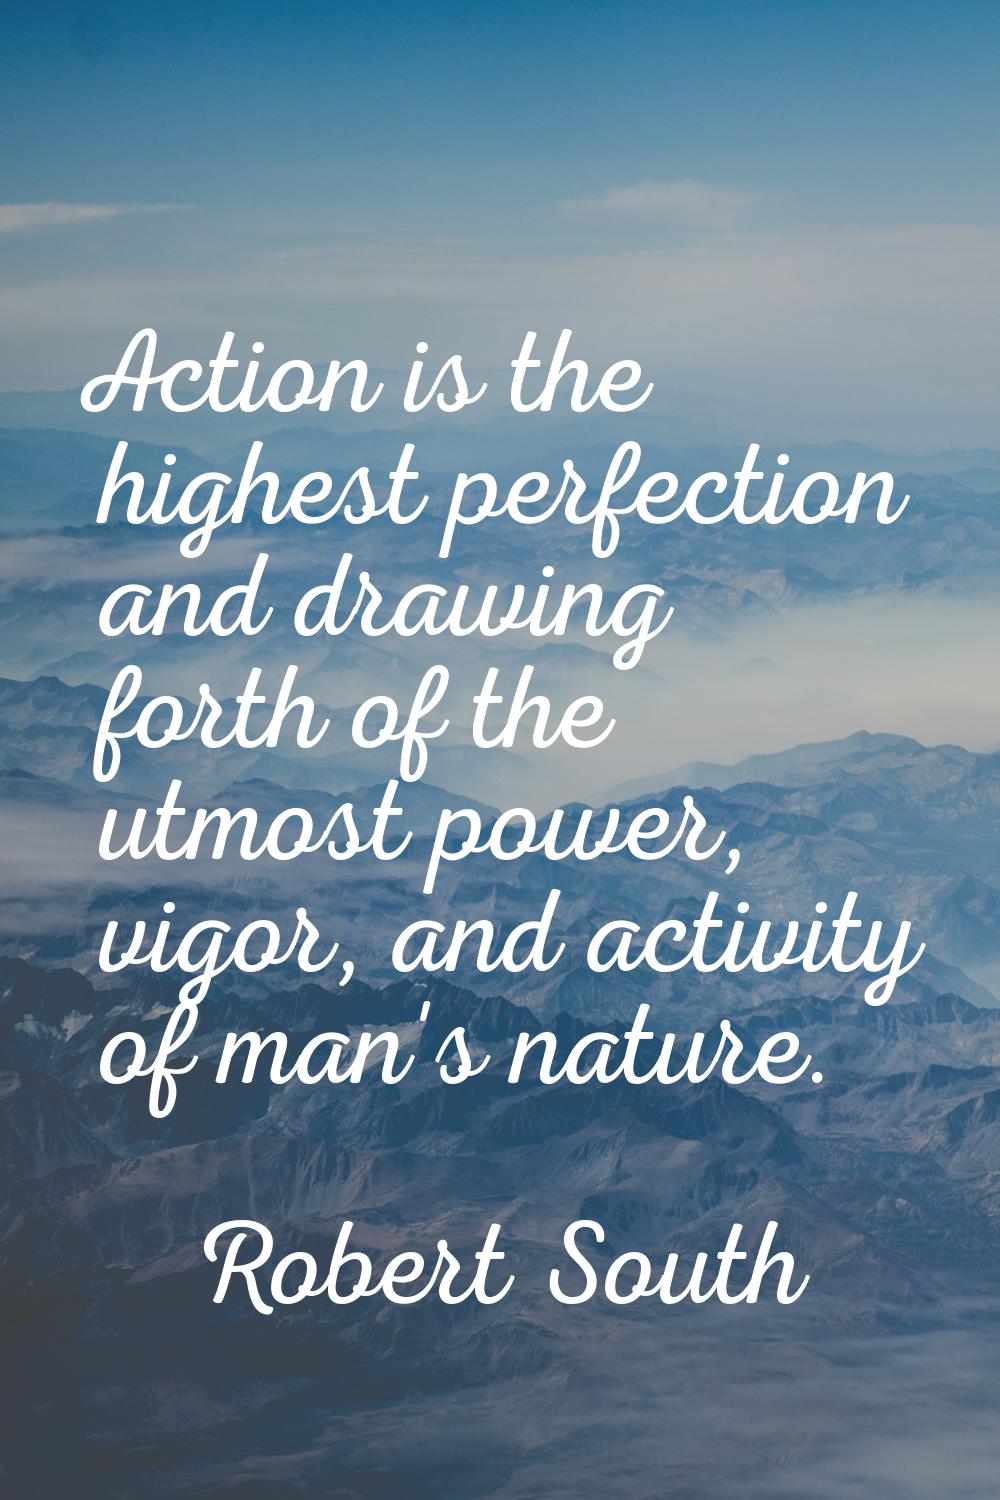 Action is the highest perfection and drawing forth of the utmost power, vigor, and activity of man'